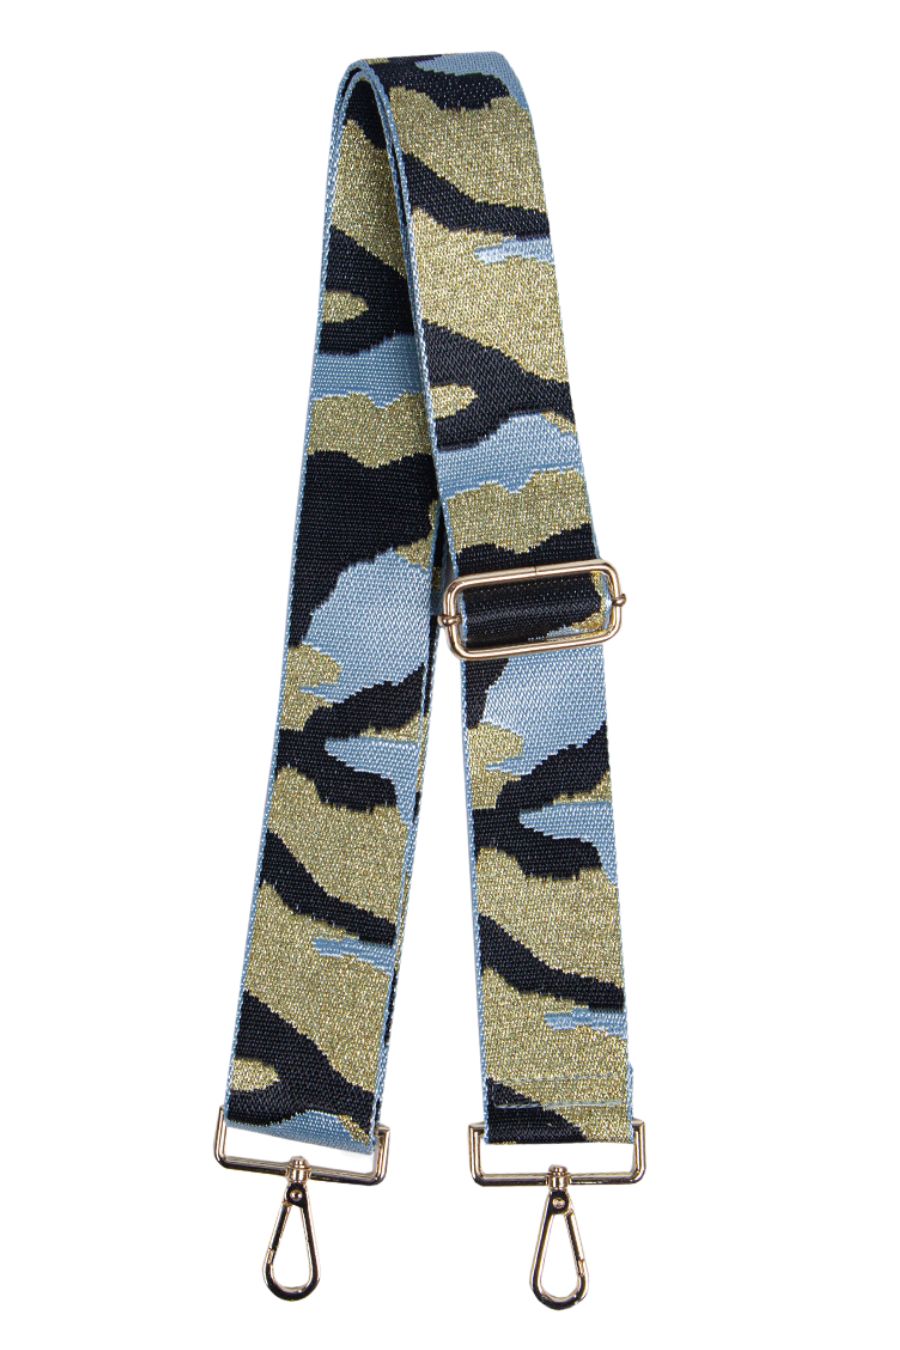 blue and gold camo print crossbody bag strap. adjustable strap with gold clip on attachments